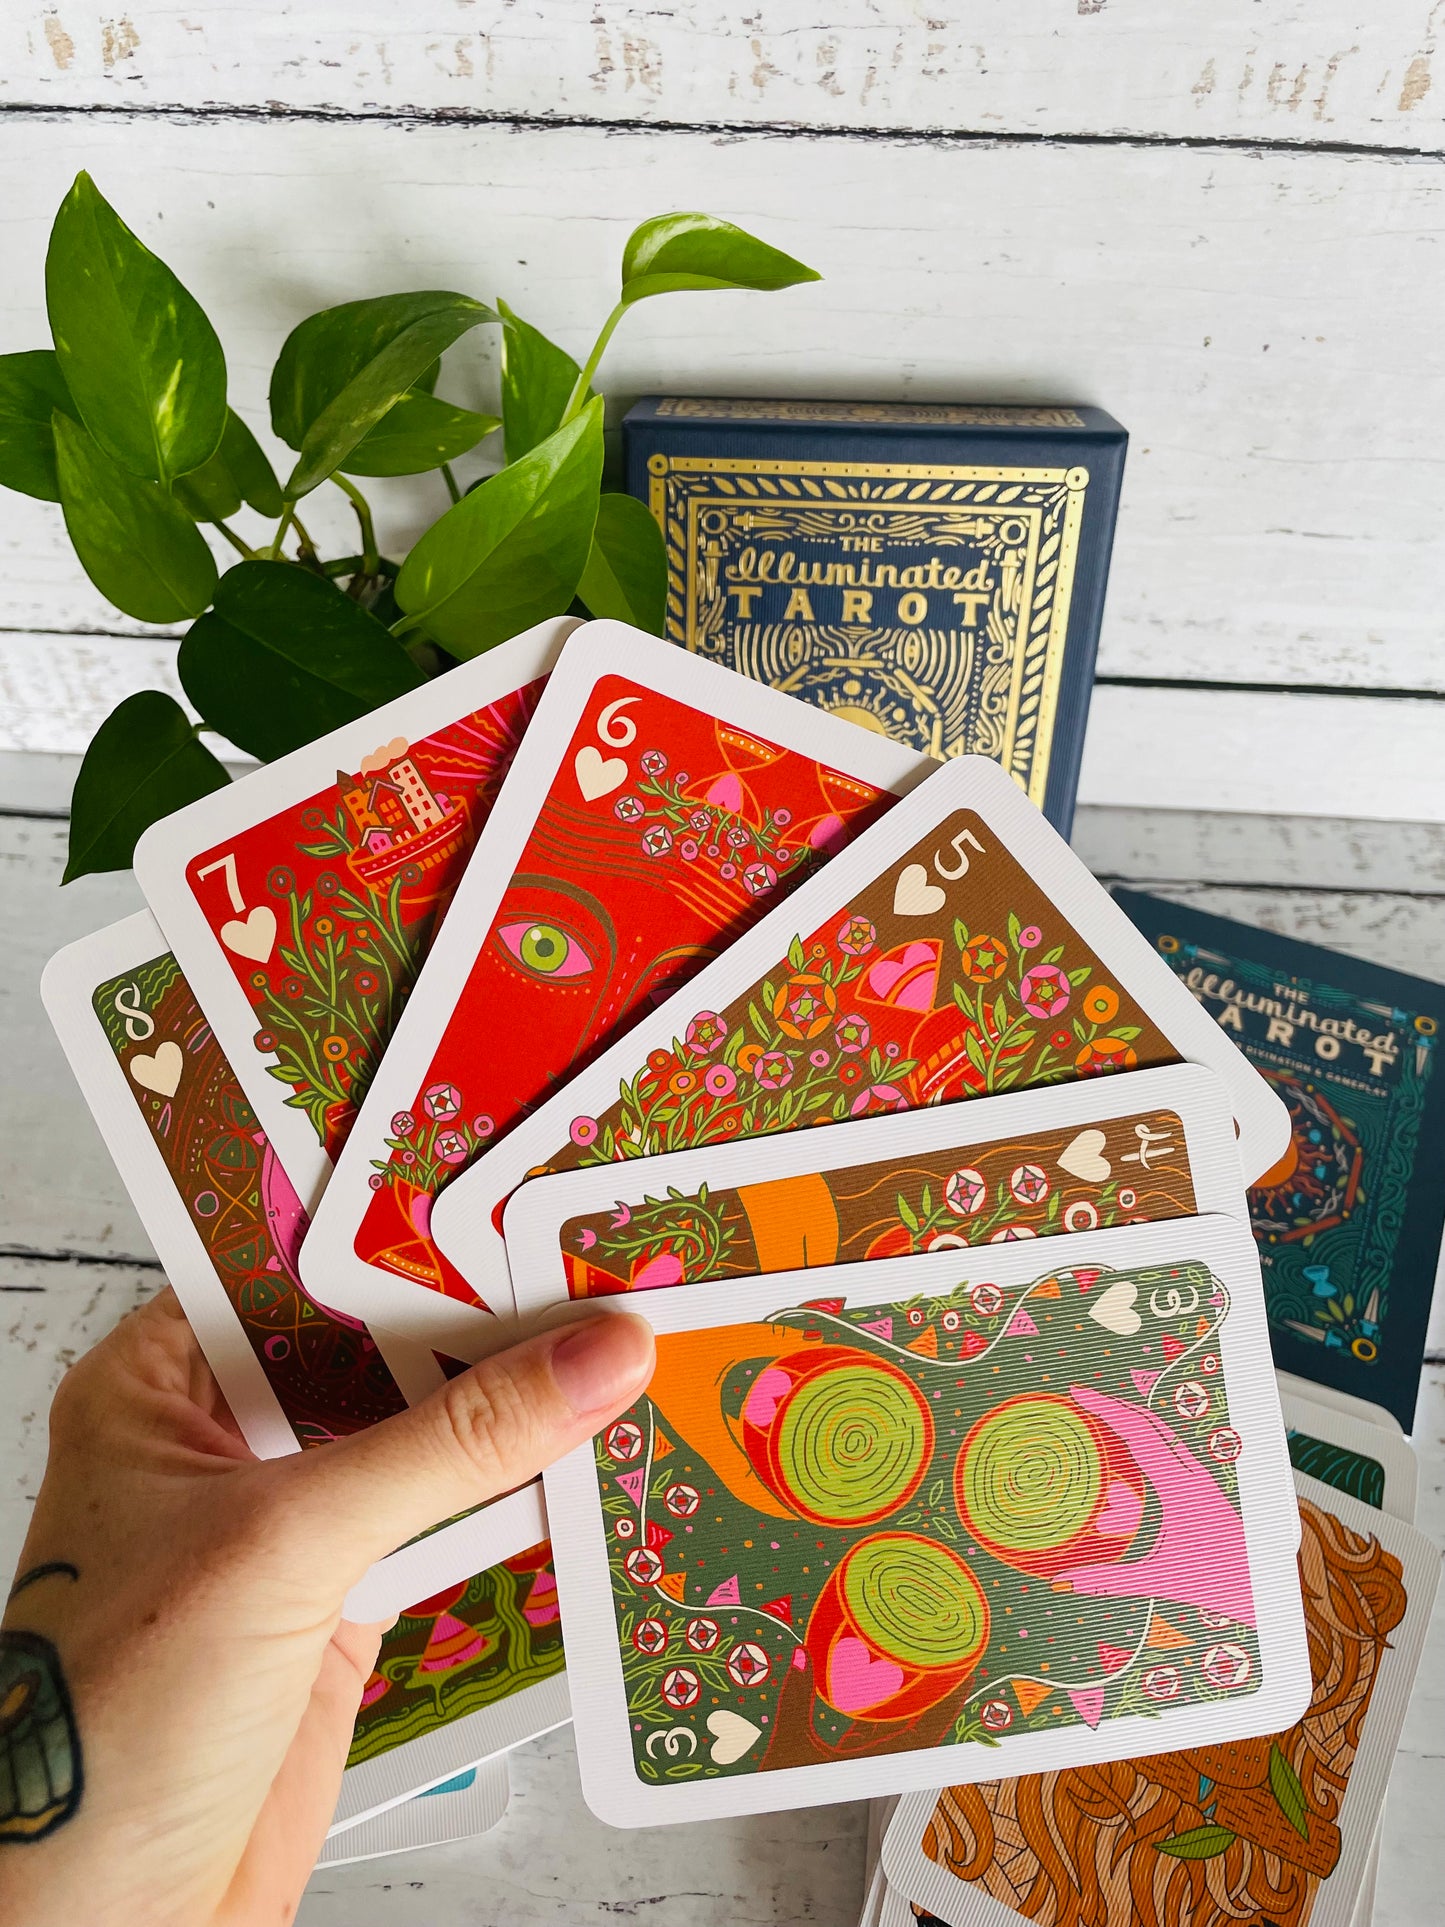 The Iluminated Tarot cards for Divination